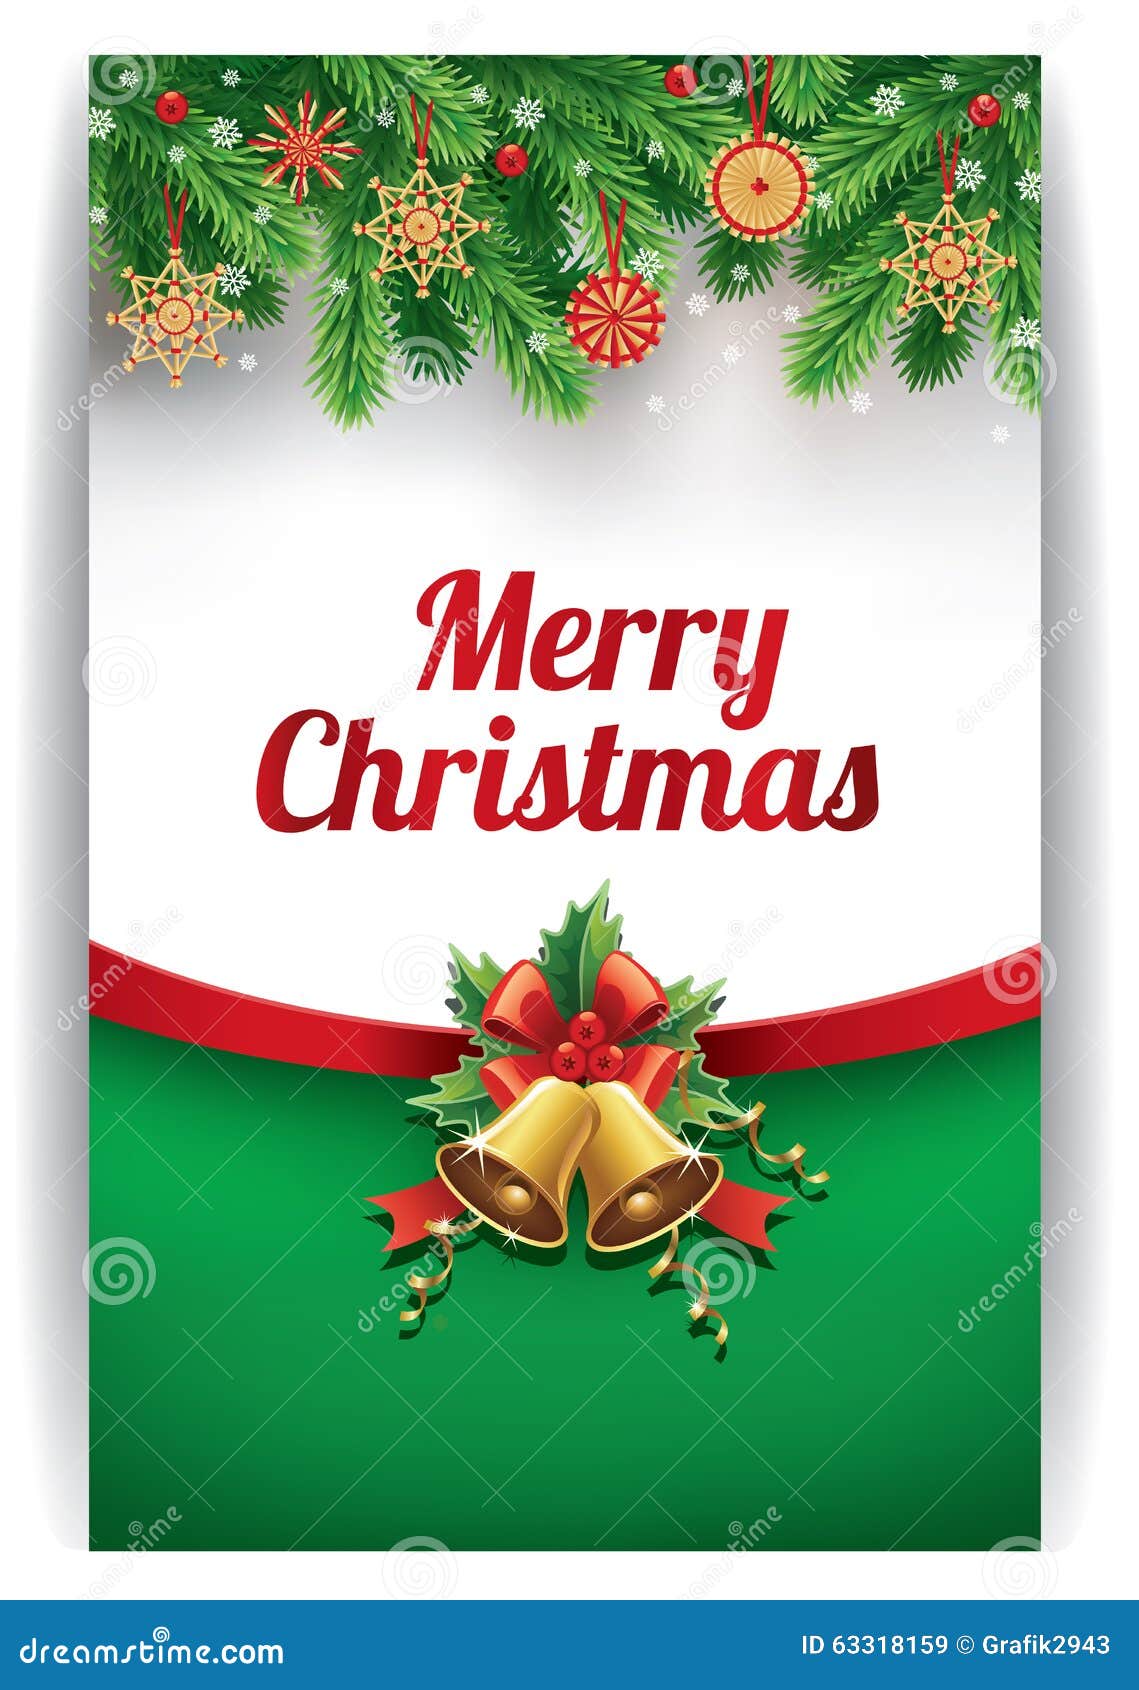 https://thumbs.dreamstime.com/z/merry-christmas-background-traditional-straw-decorations-63318159.jpg